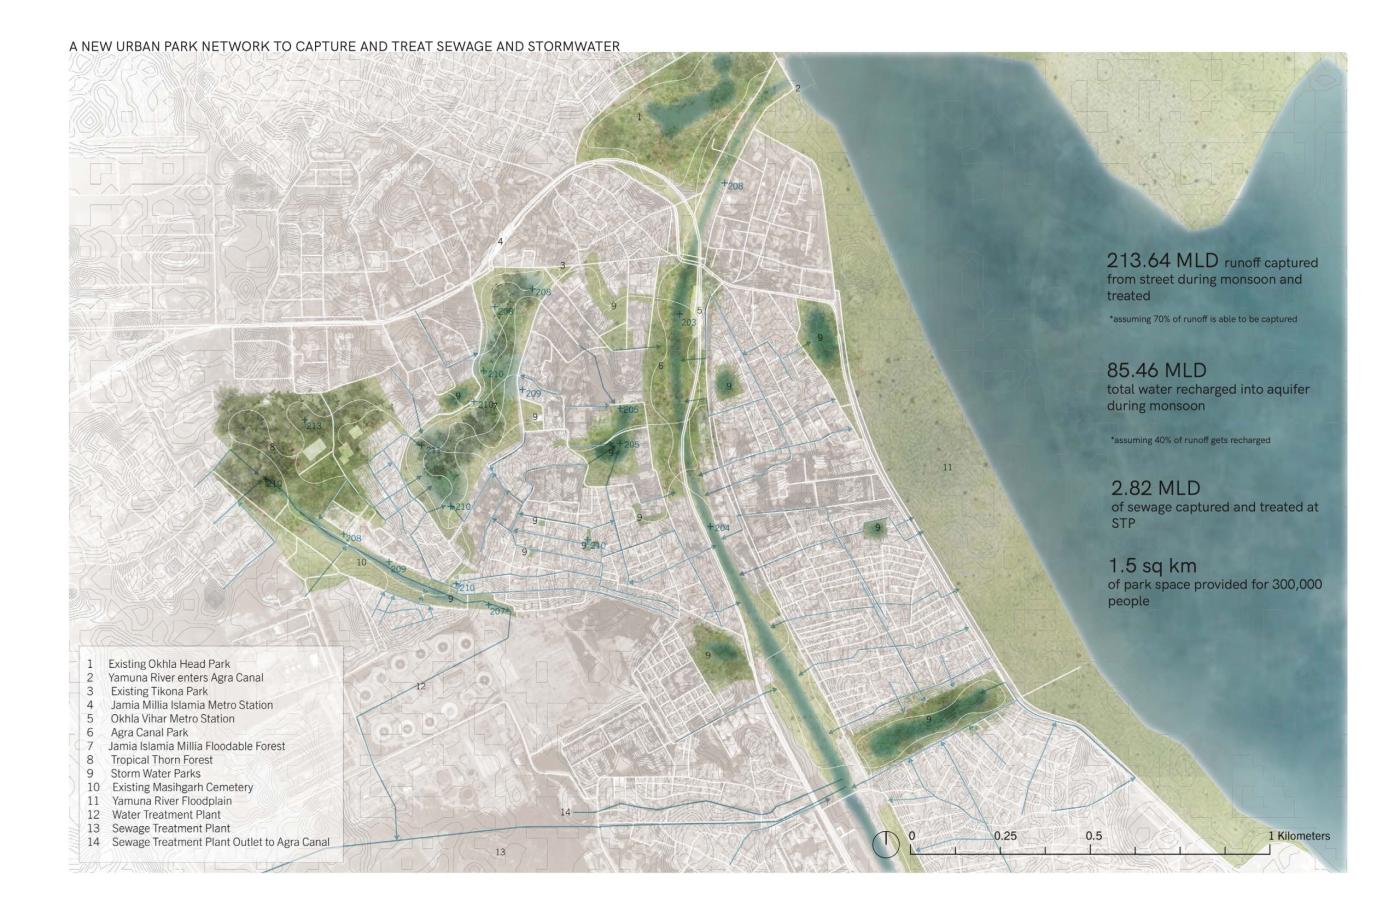 Yamuna River Project - Proposed New Urban Park Network Plan Drawing